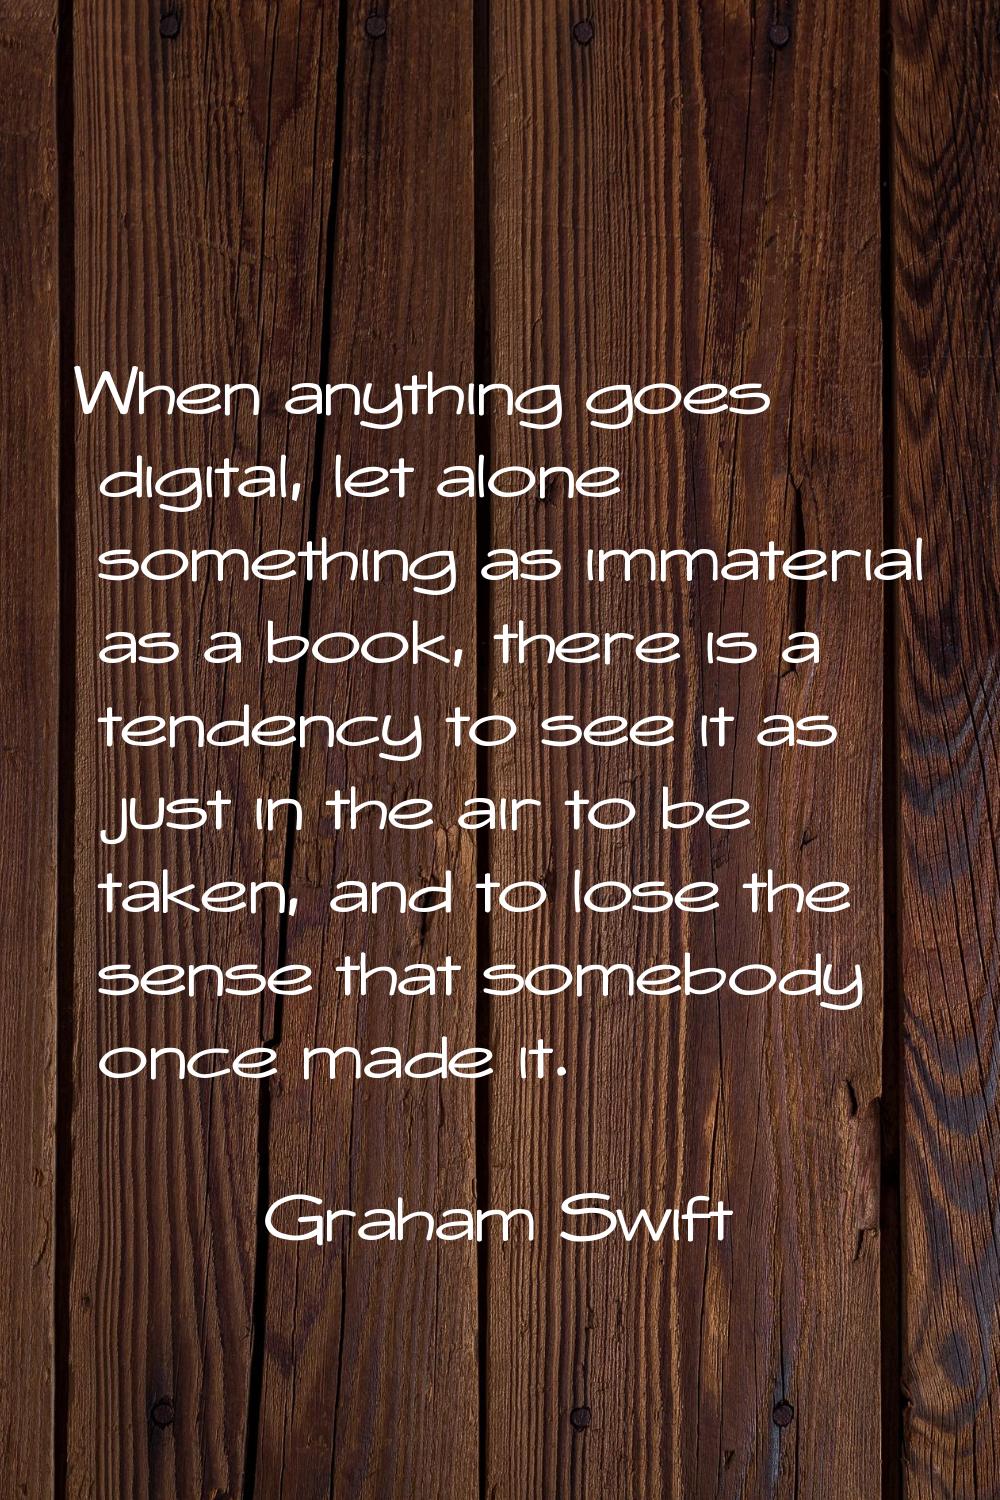 When anything goes digital, let alone something as immaterial as a book, there is a tendency to see